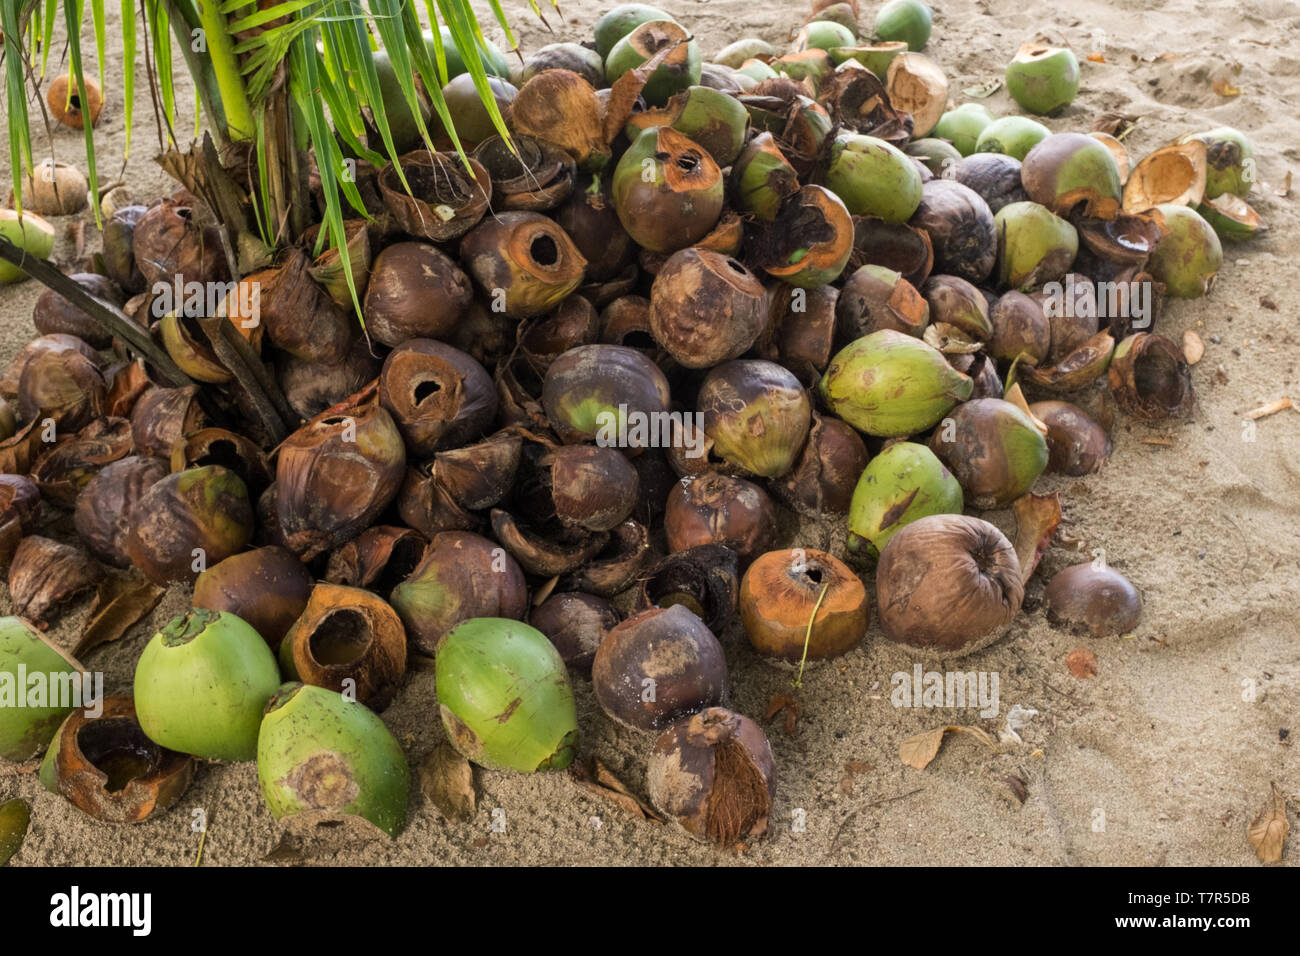 A close up of a pile of discarded used coconut husks, lots of brown and greens. Stock Photo